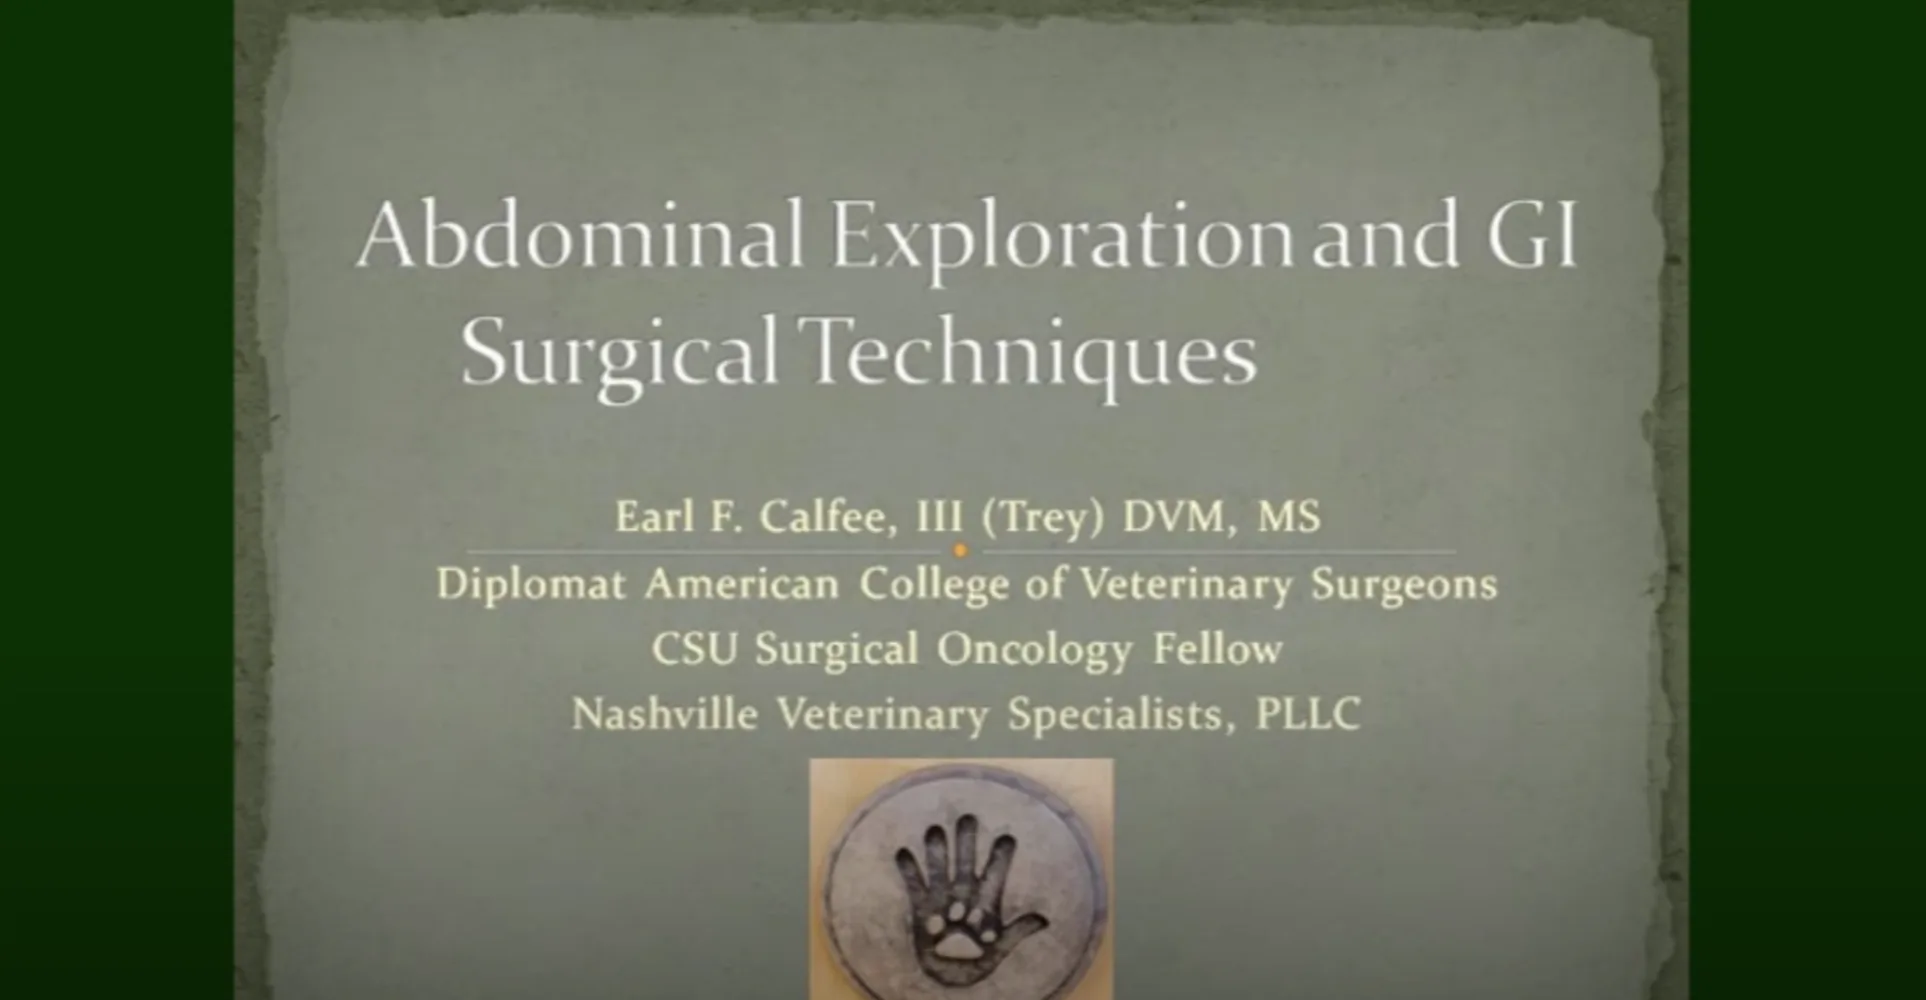 Abdominal Exploration and GI Surgical Technical Tips Video at NVS